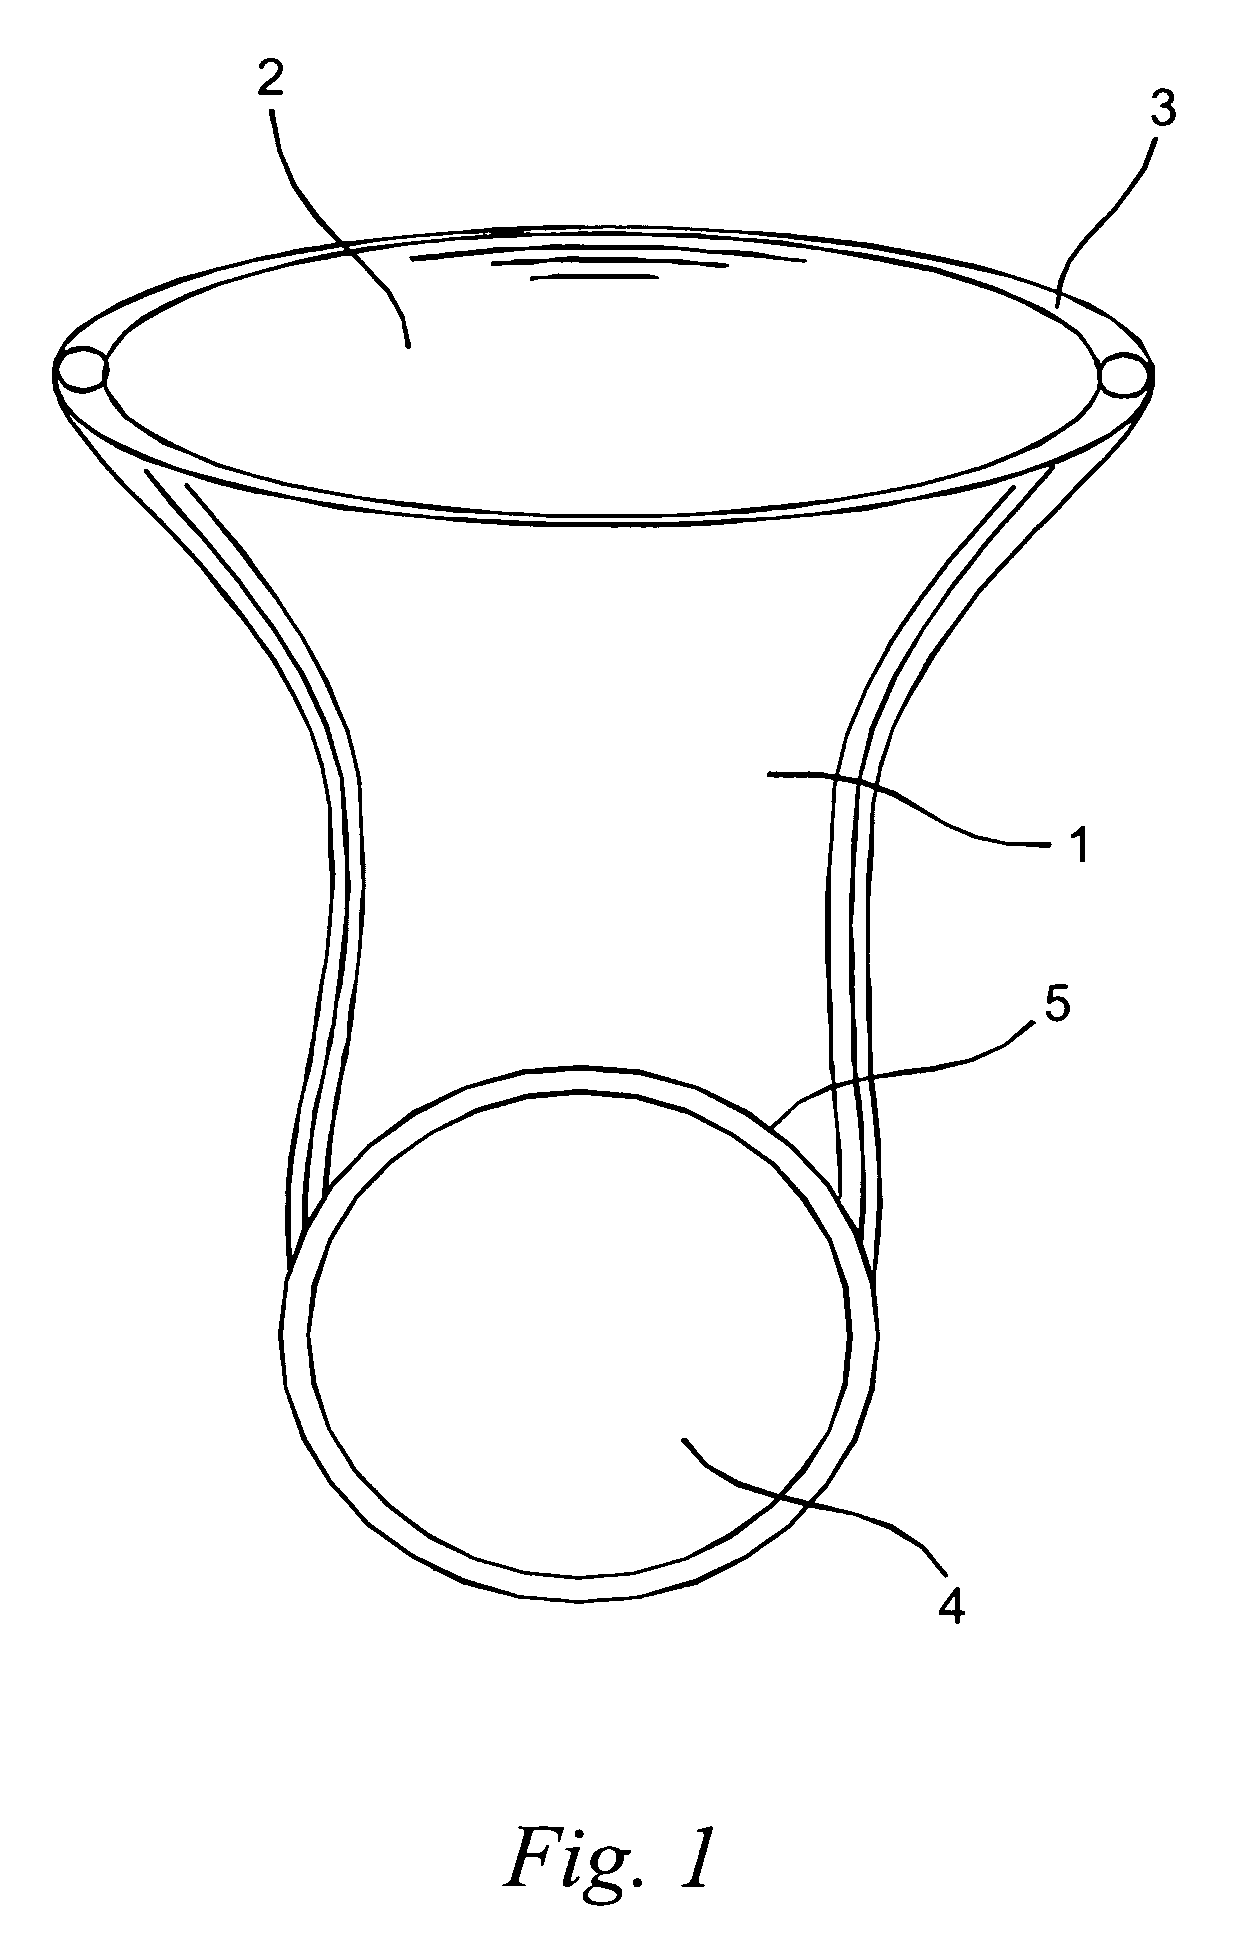 Contraceptive sheath with integrated bead construction